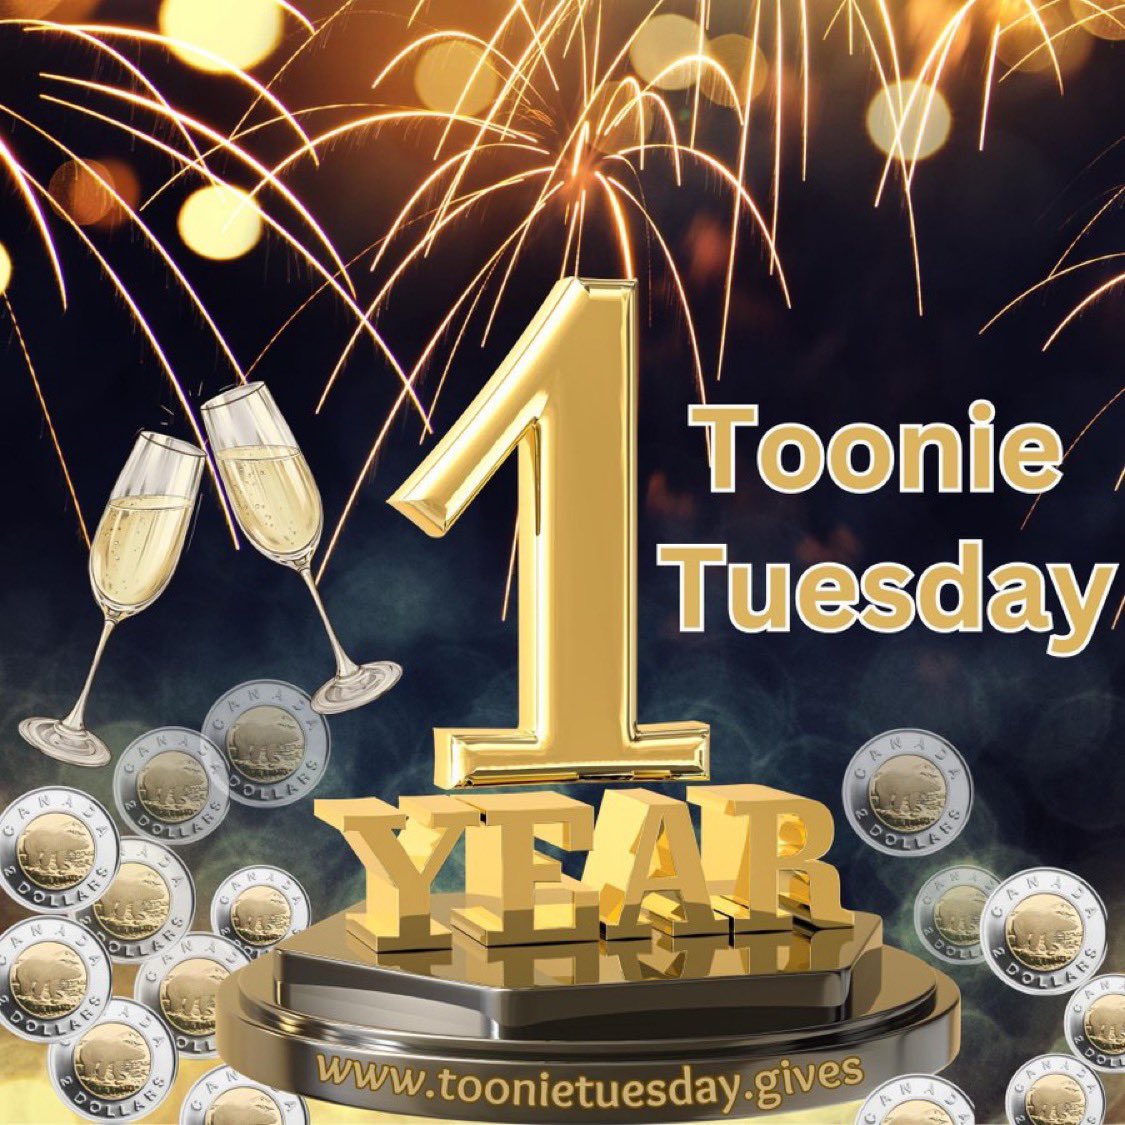 💎 It’s the 1 year anniversary for the amazing work of @toonie_tuesday #ToonieTuesday group. This team and YOU have made an incredible impact for what my three teams @NAFOArmories @NAFOPartisans and @wilendhornets have been able to provide in critical aid for Ukraine.